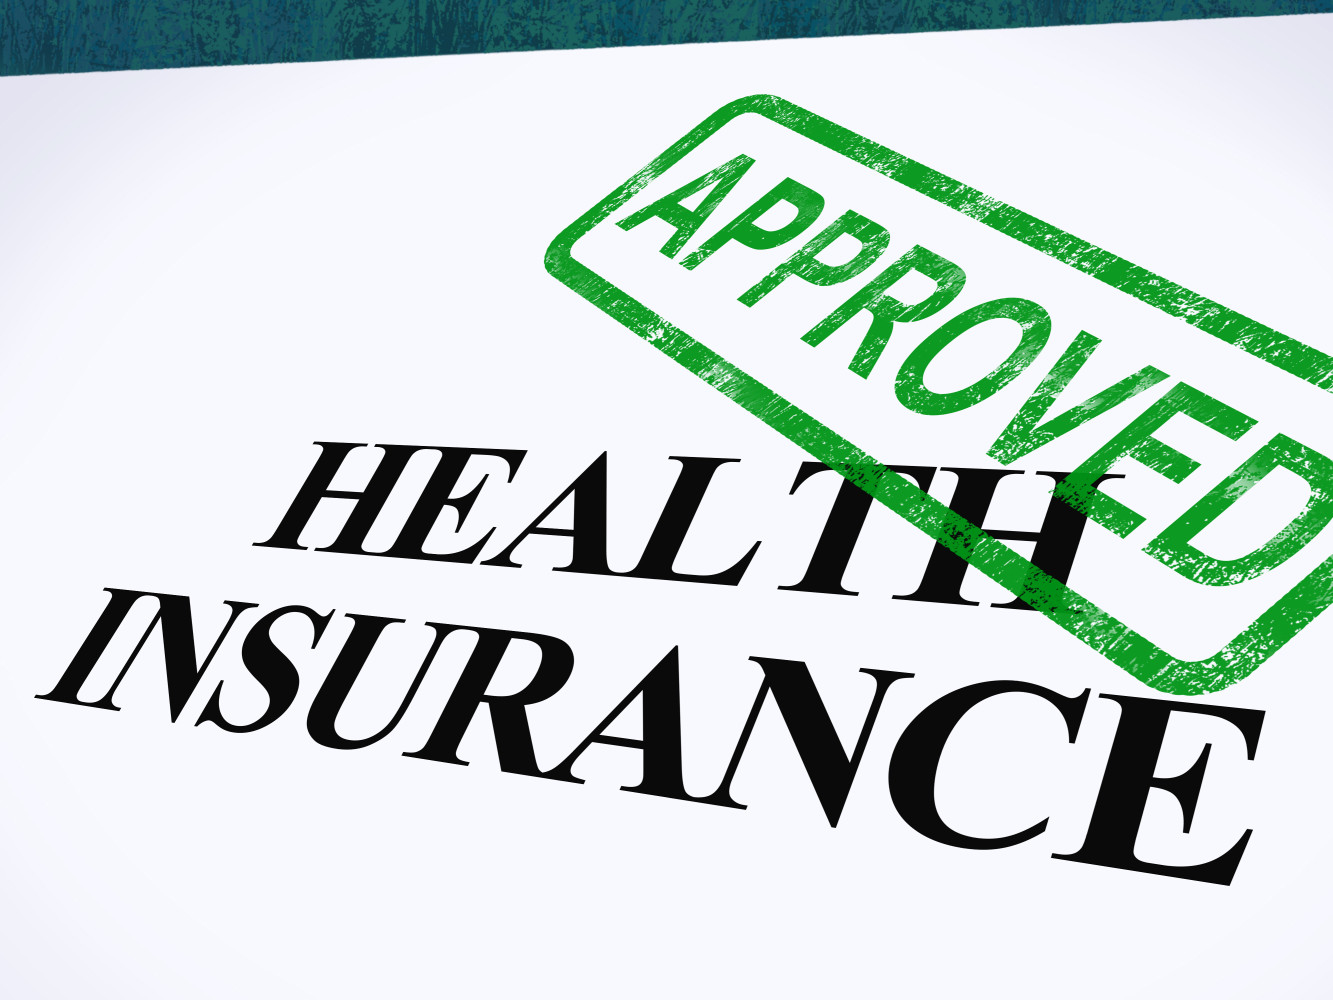 Health Insurance Approved Form Showing Successful Medical Application